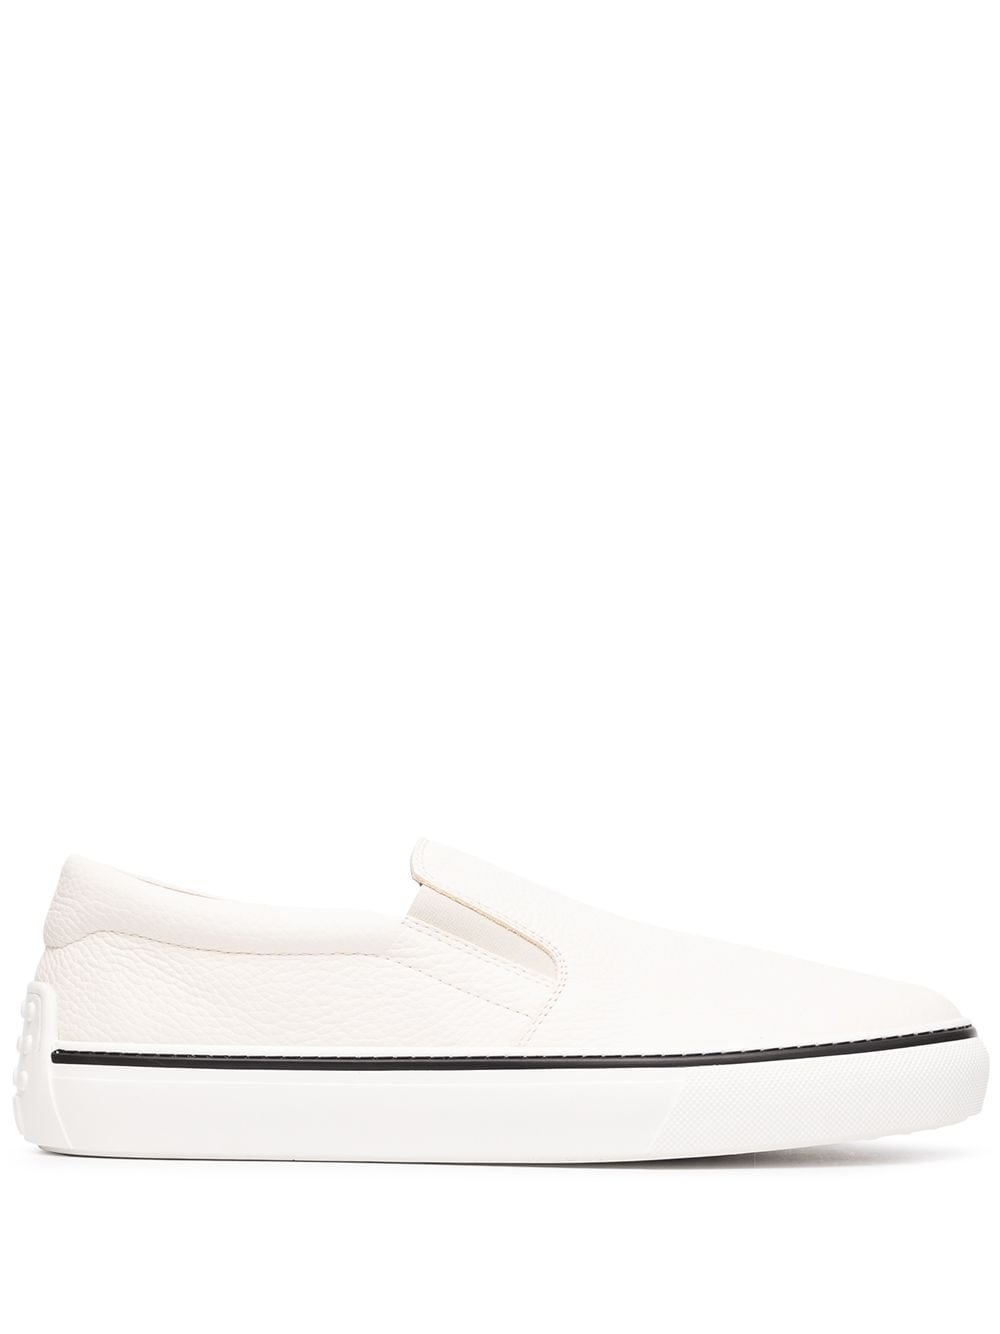 Tod's hammered-effect slip-on sneakers - White von Tod's